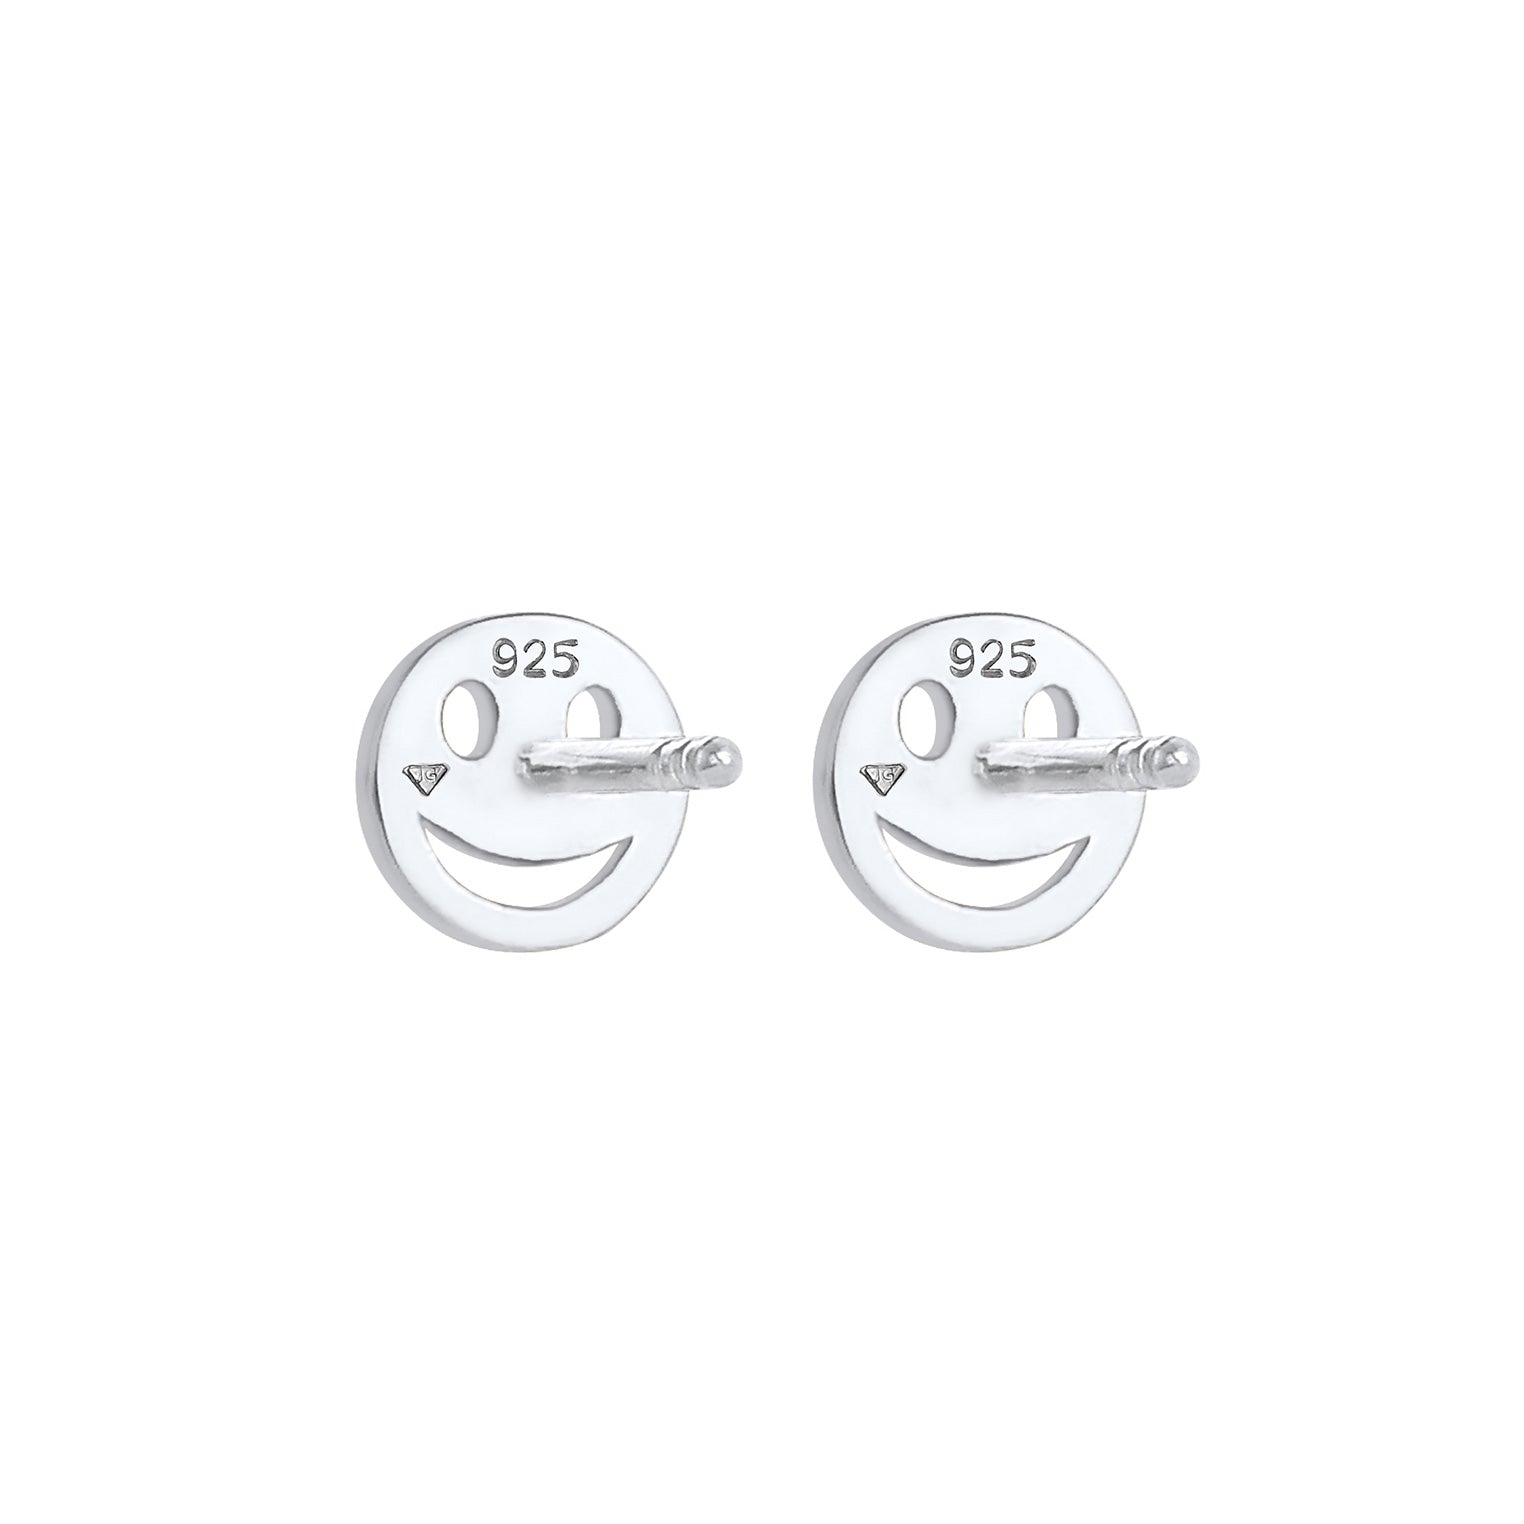 Ohrring mit Smiling Face – Jewelry Elli